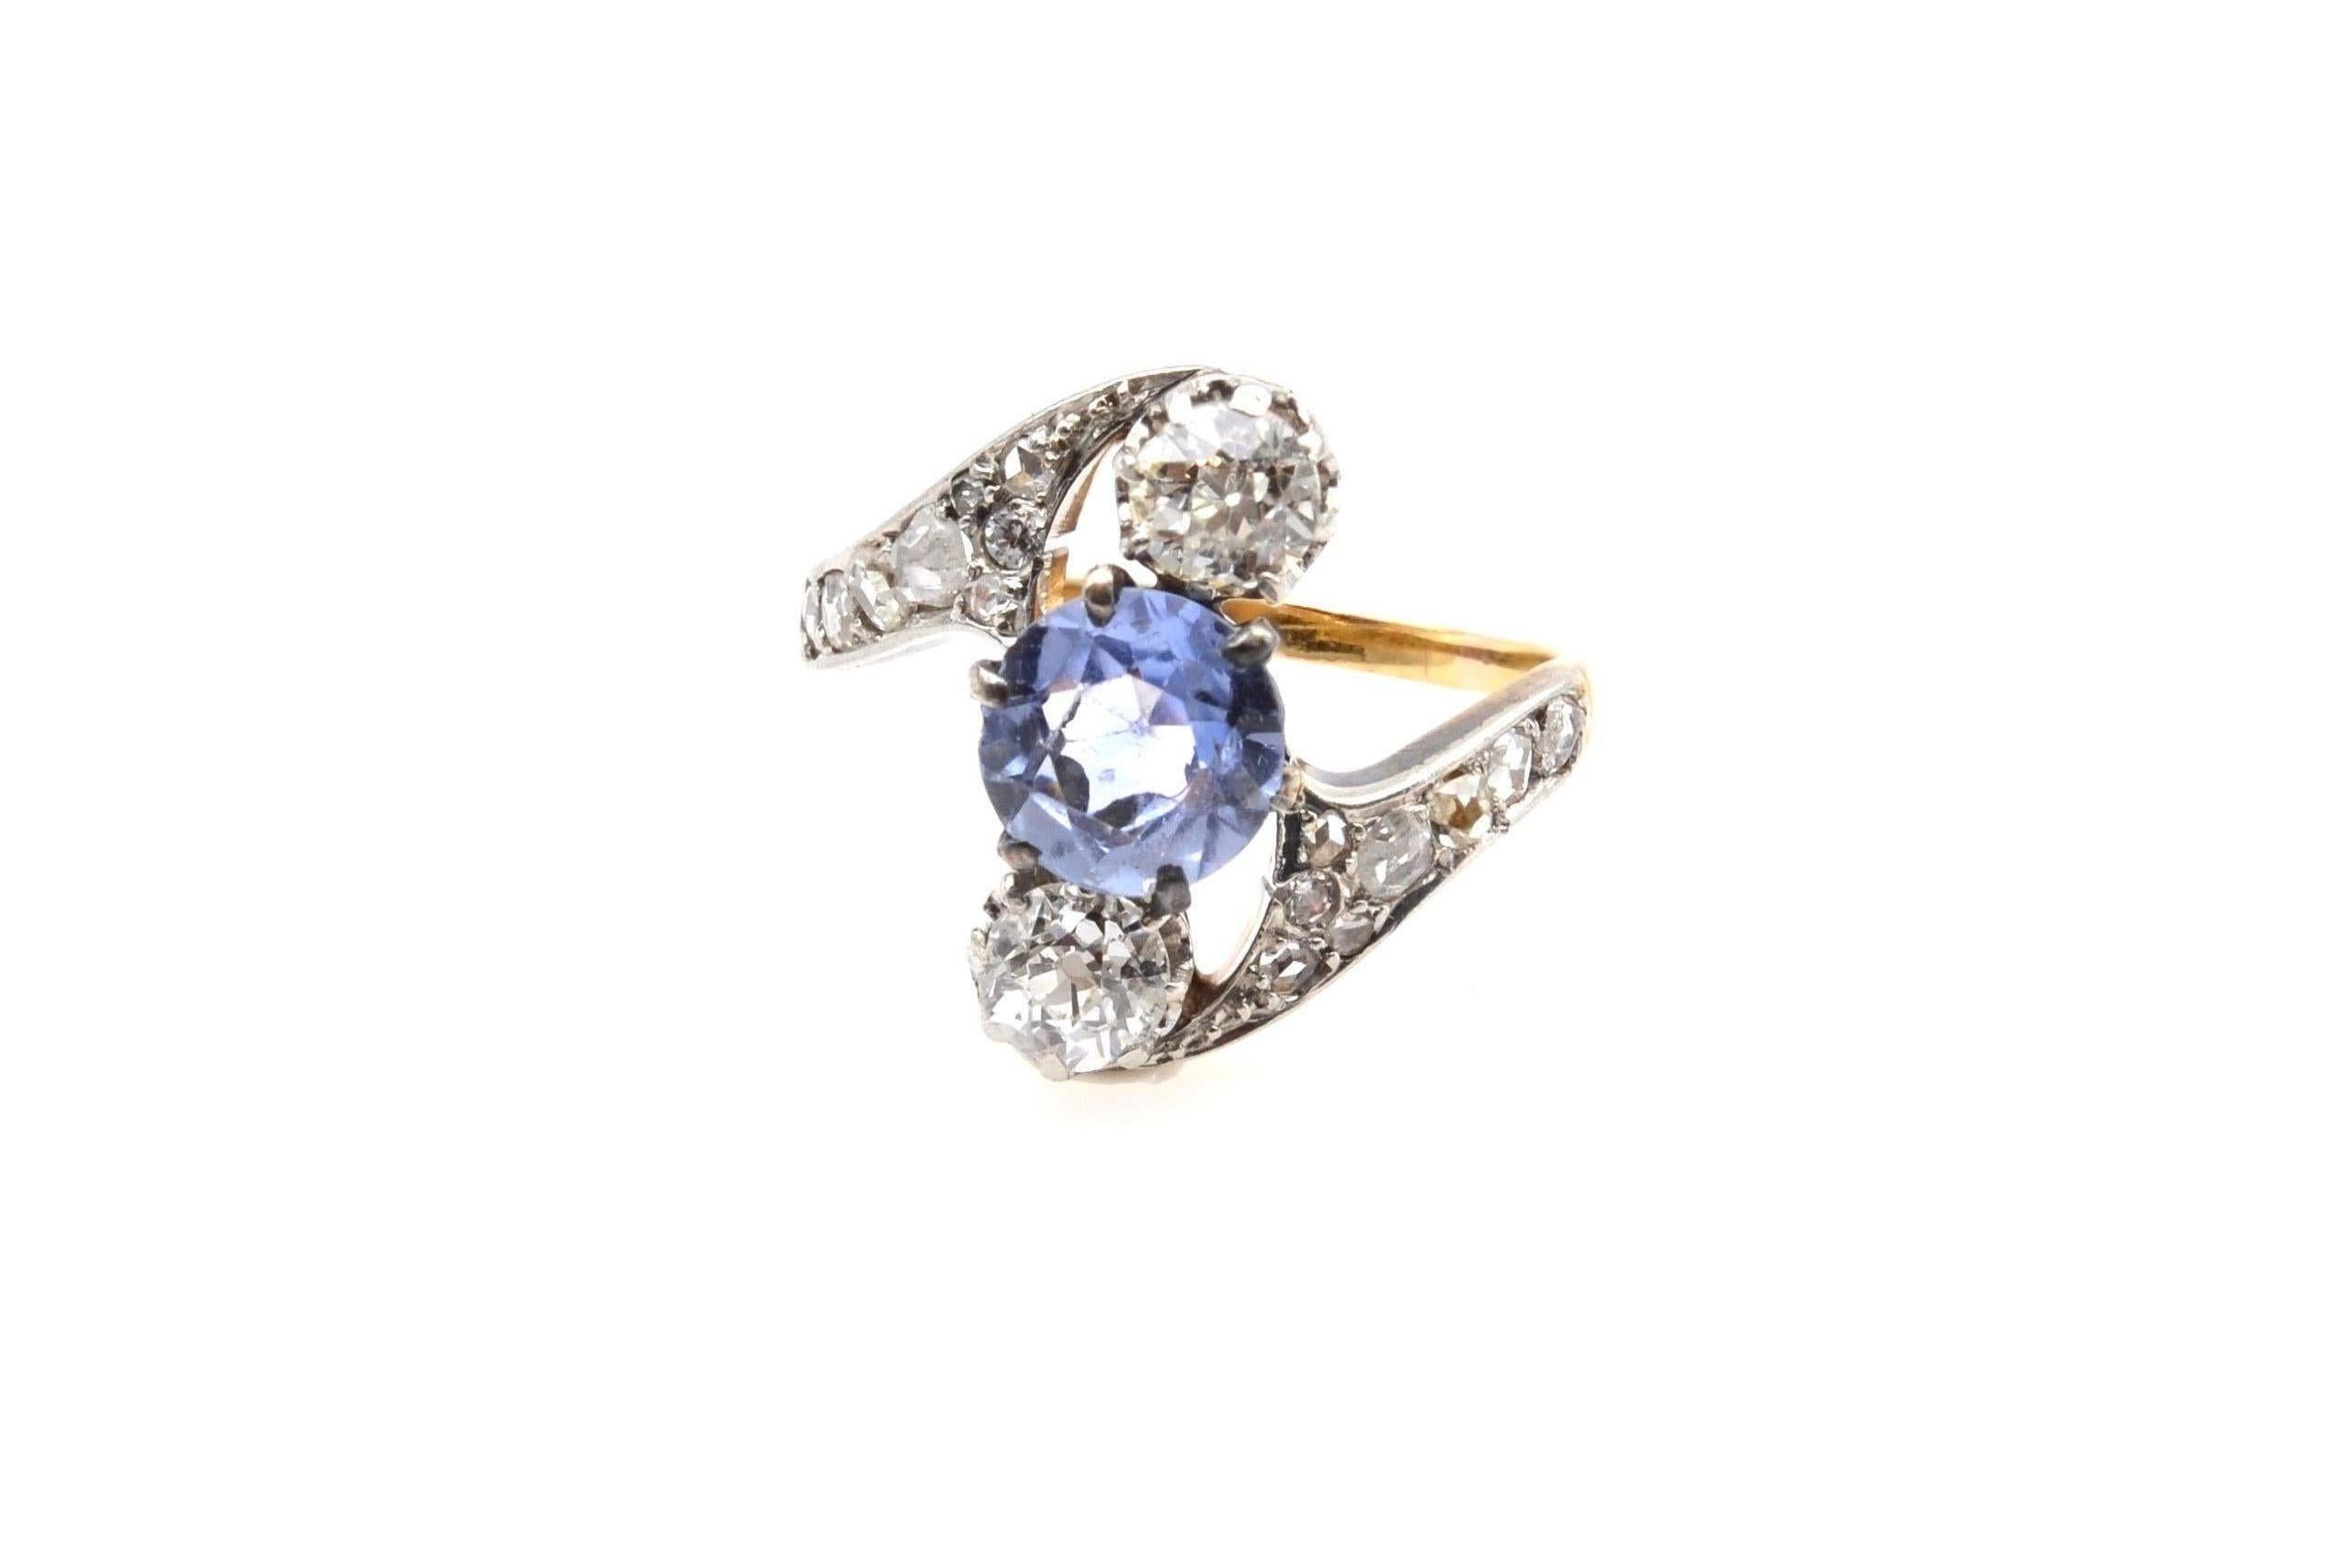 Stones: 1.60 carat Ceylon sapphire, old cut diamonds
for a total weight of 0.60 carat
and rose diamonds for a total weight of 0.15 carats.
Material: 18k yellow gold and platinum
Dimensions: 1.6 cm length on finger
Period: 1900
Weight: 4.6g
Size: 53